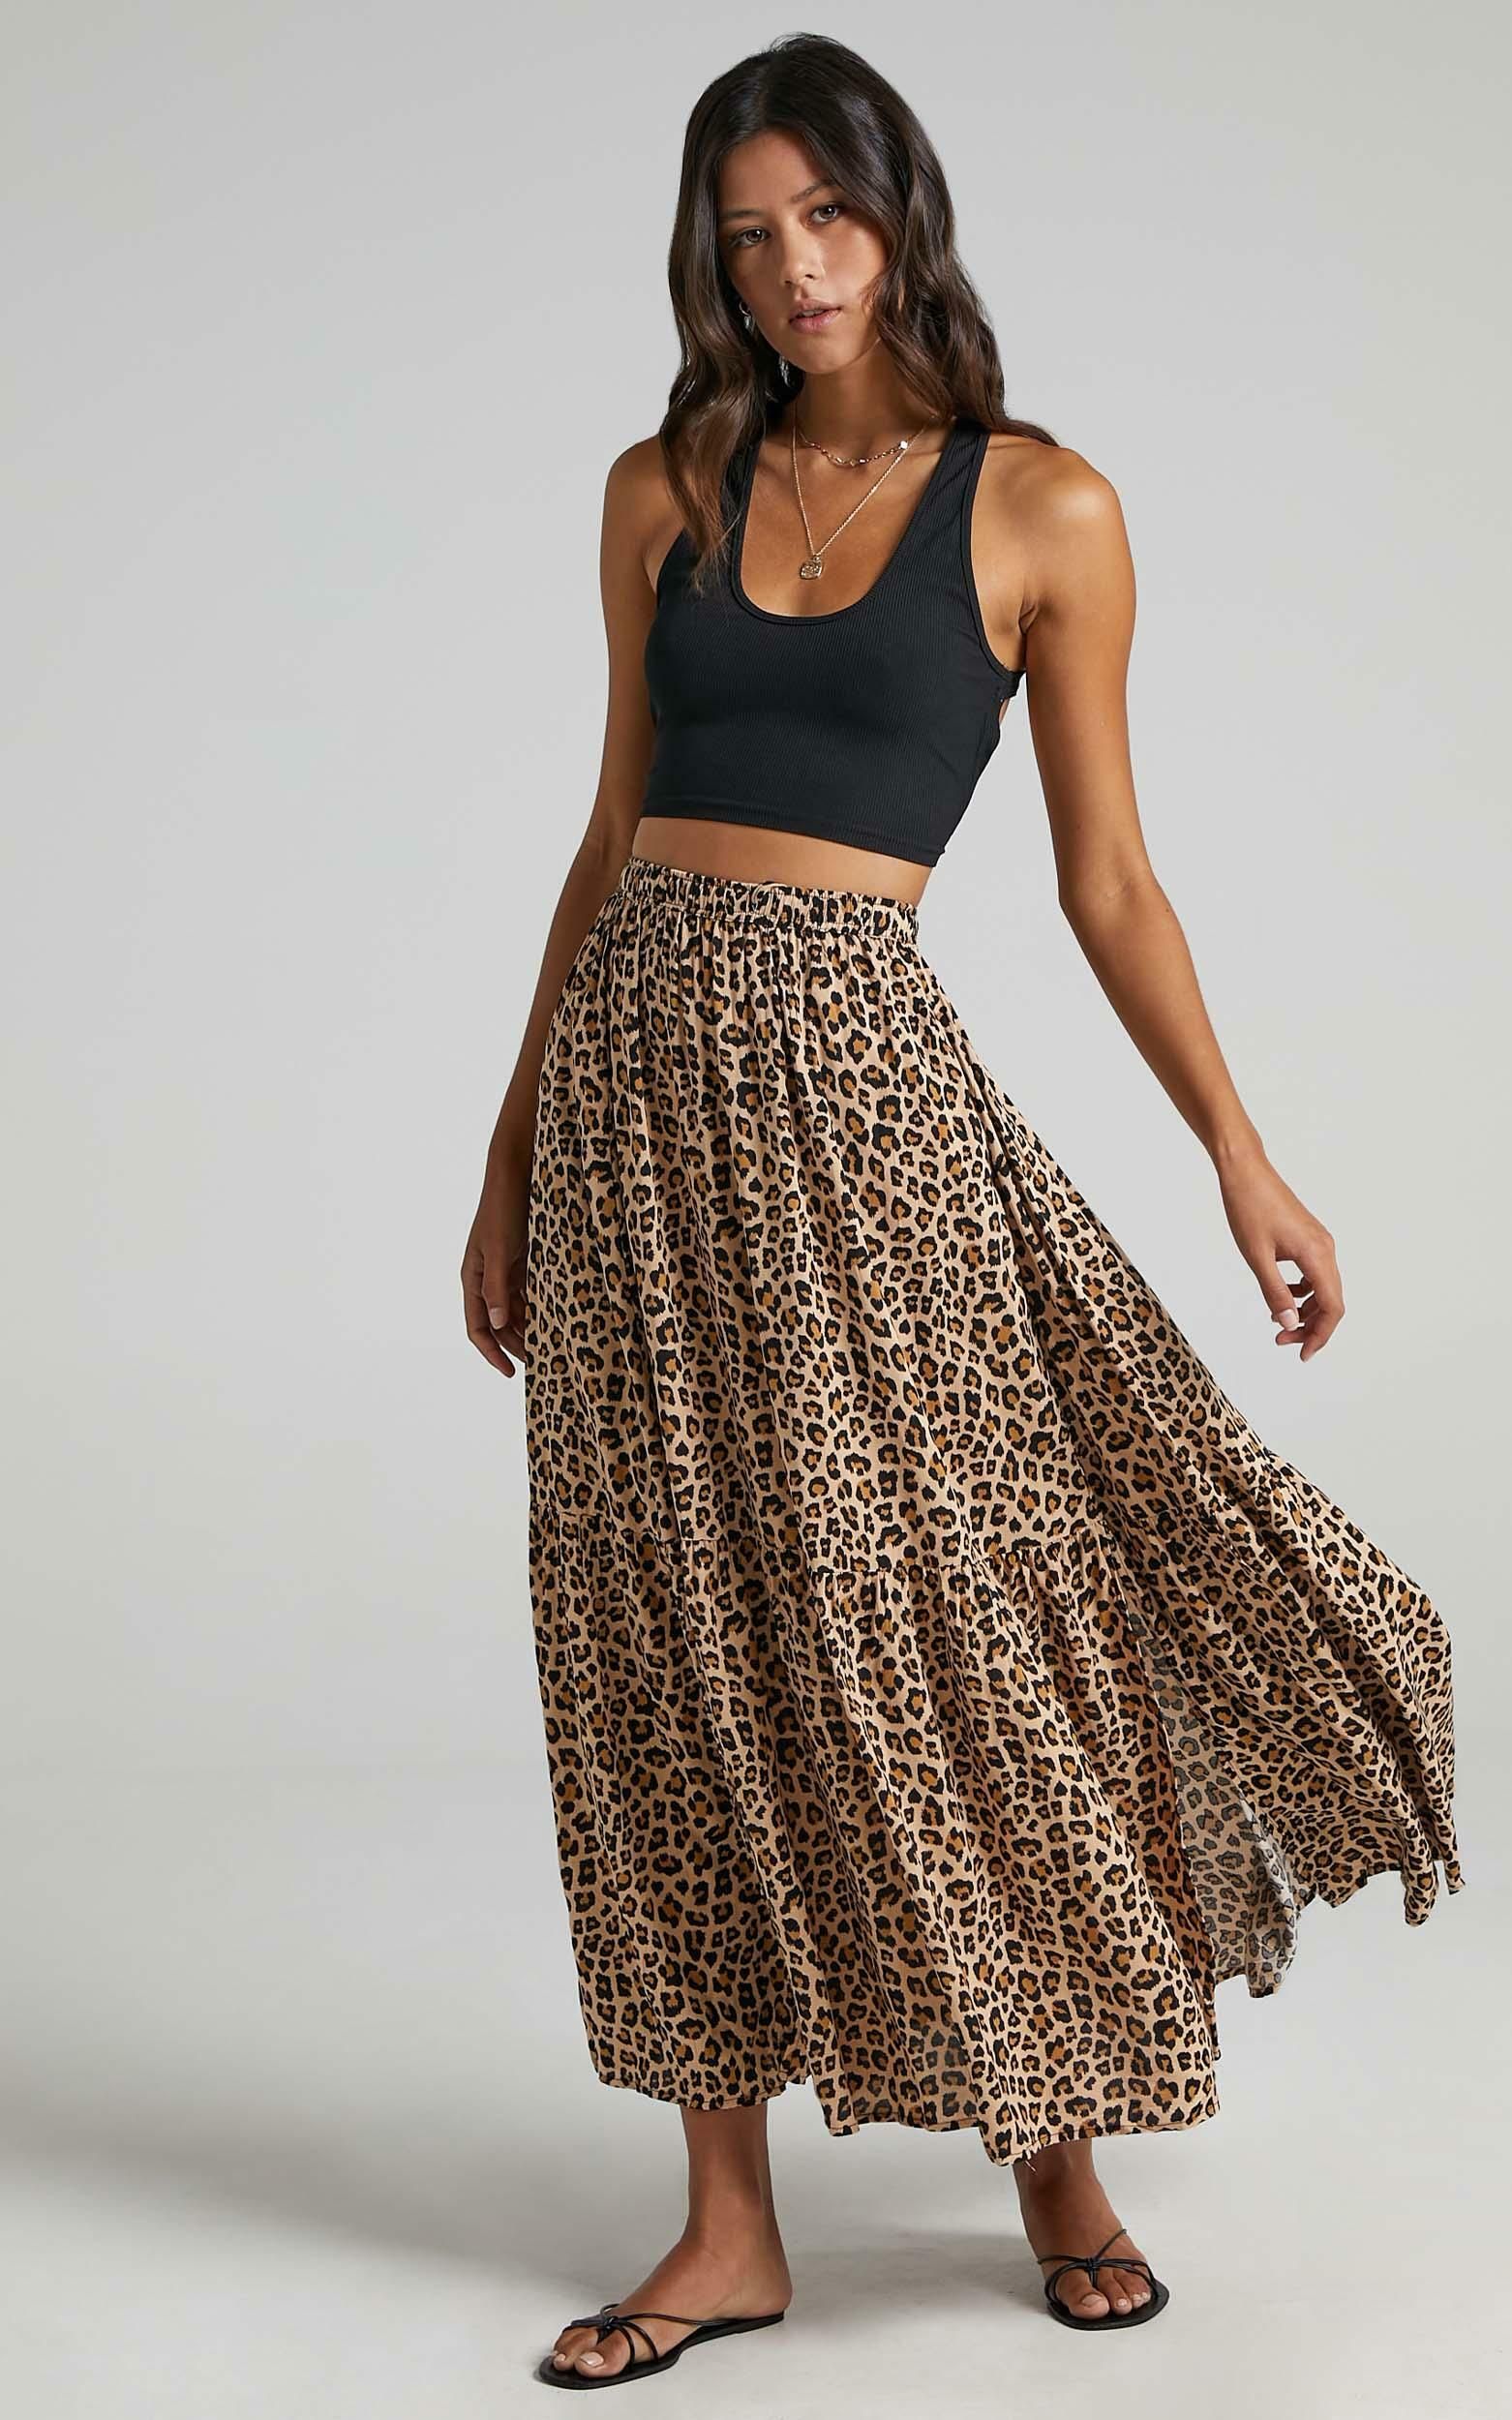 Off To Bali Skirt in Leopard Print | Showpo - deactived